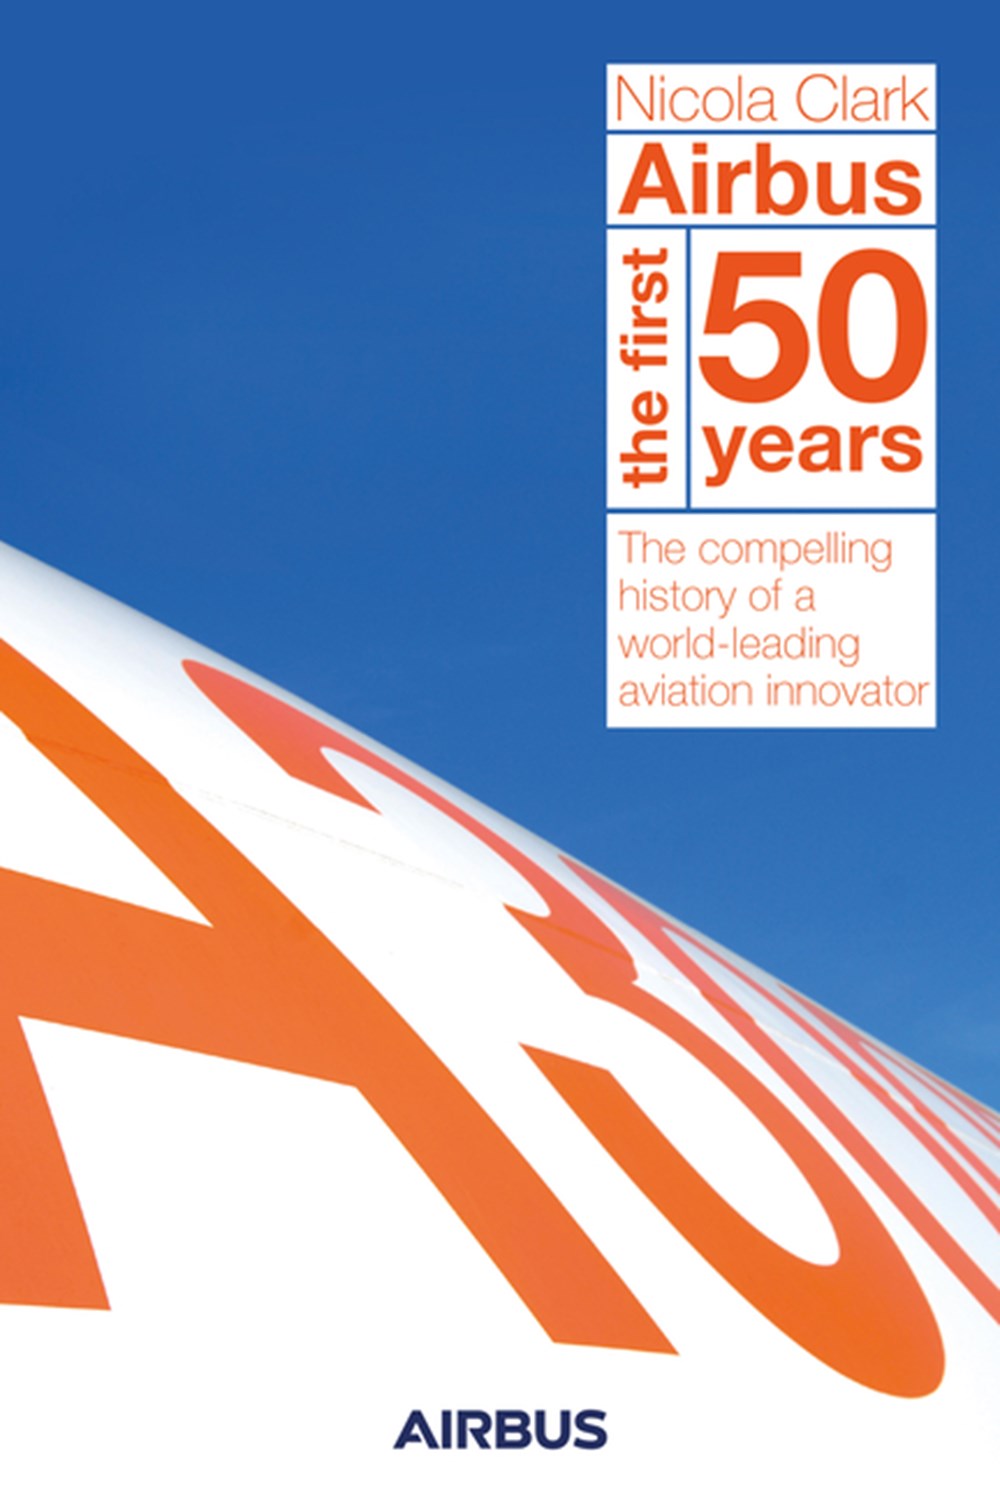 Airbus The First 50 Years: The Story of a World-Leading Aviation Innovator